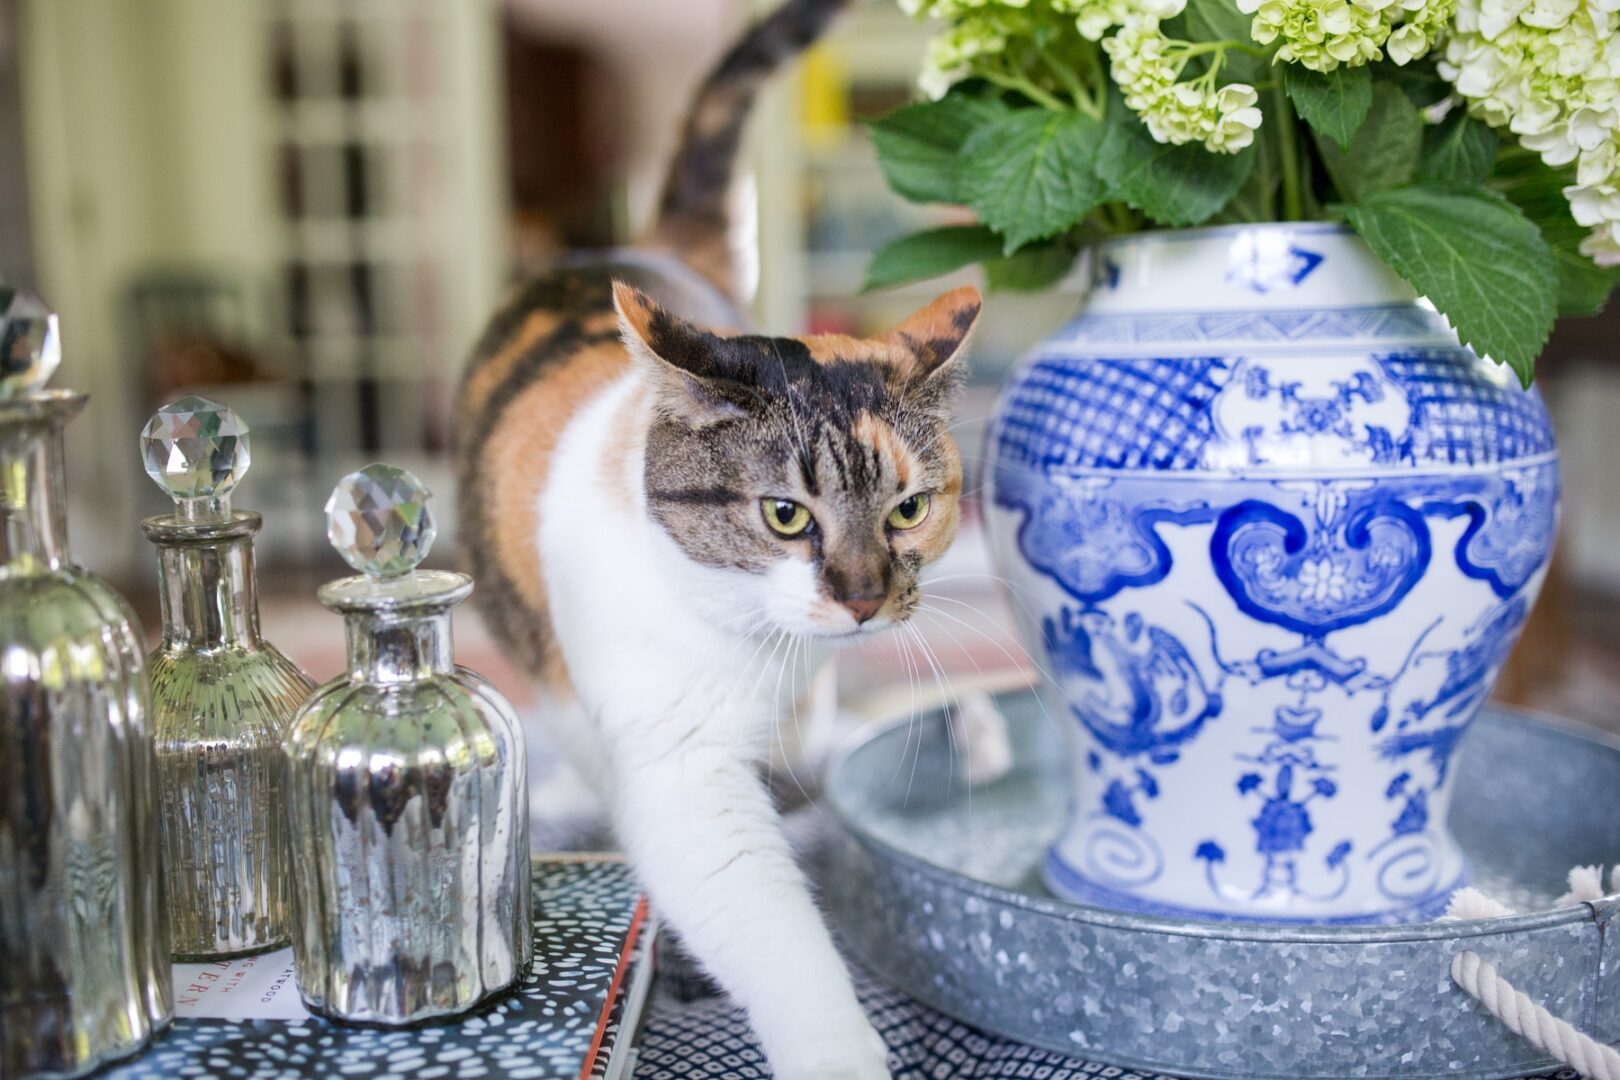 A cat is standing on the table next to a vase.